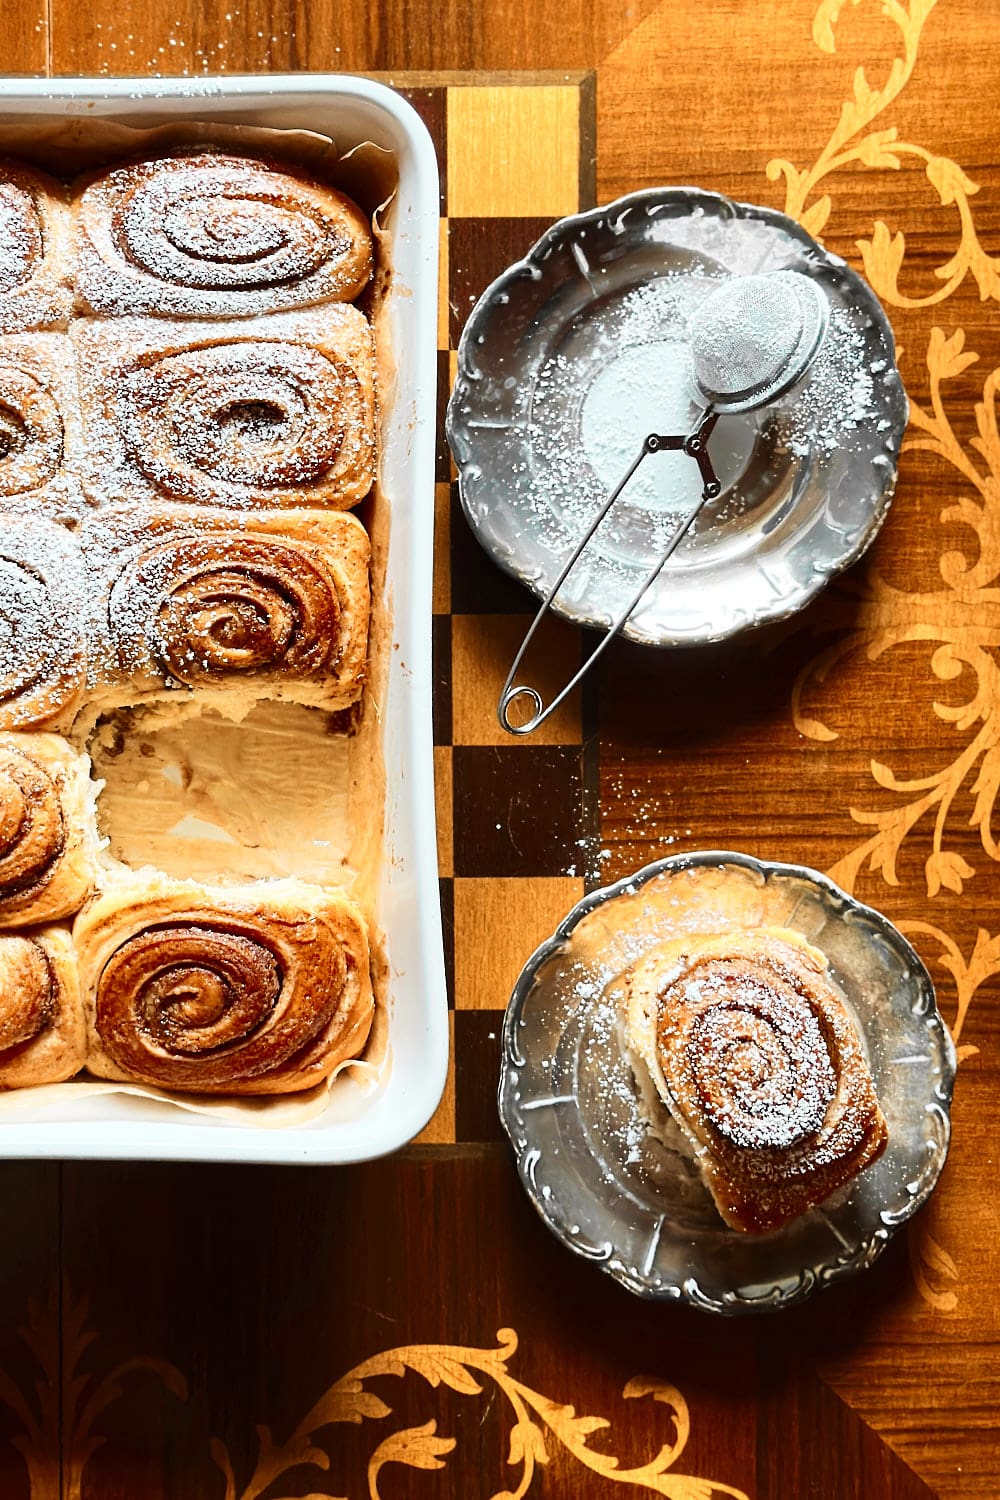 A baking dish with sourdough cinnamon buns and one bun on a small separate plate, dusted with powdered sugar.